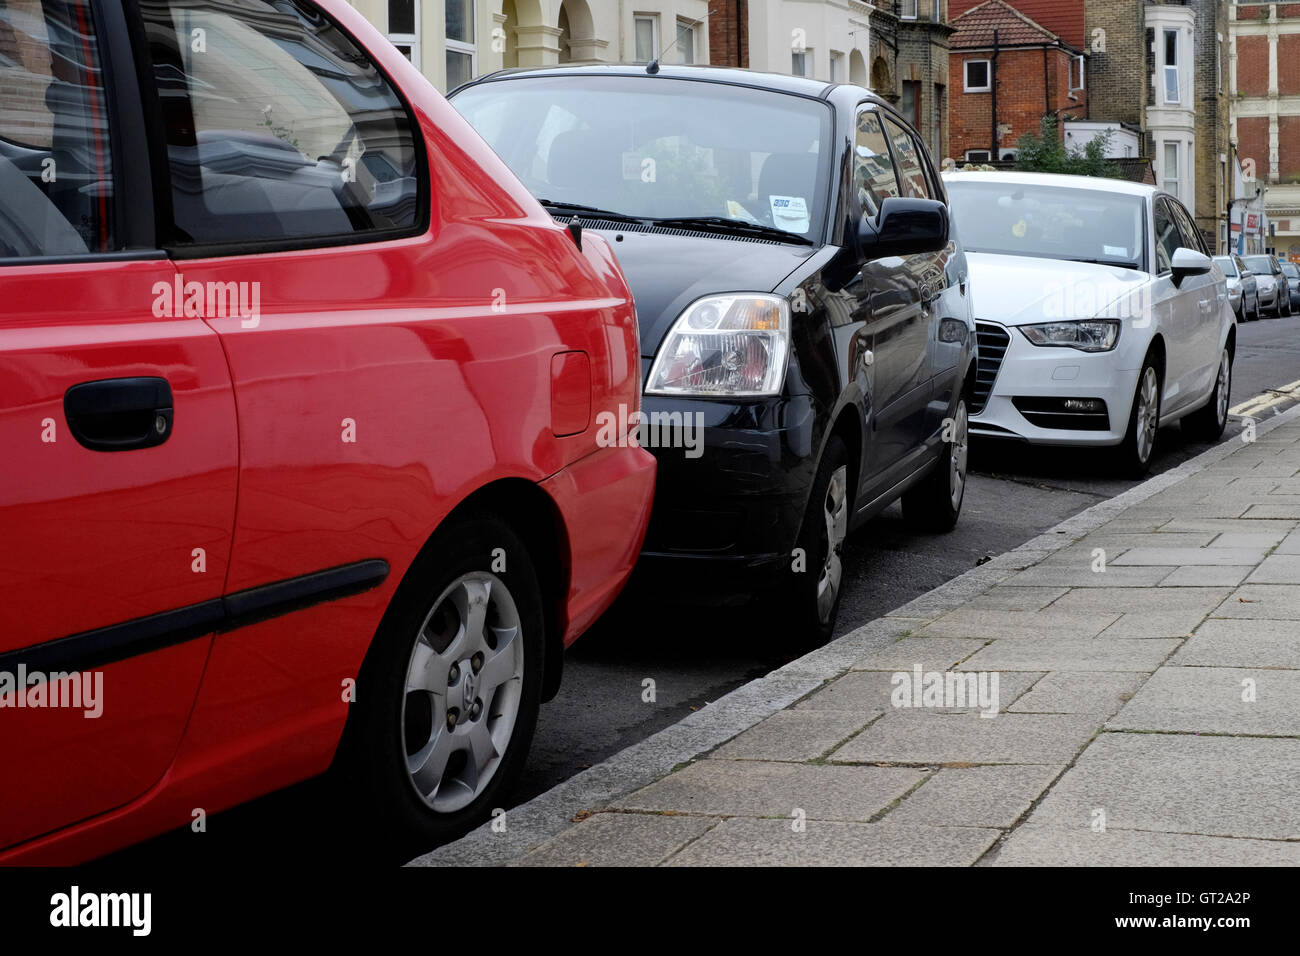 poorly parked car in a residential urban street england uk Stock Photo